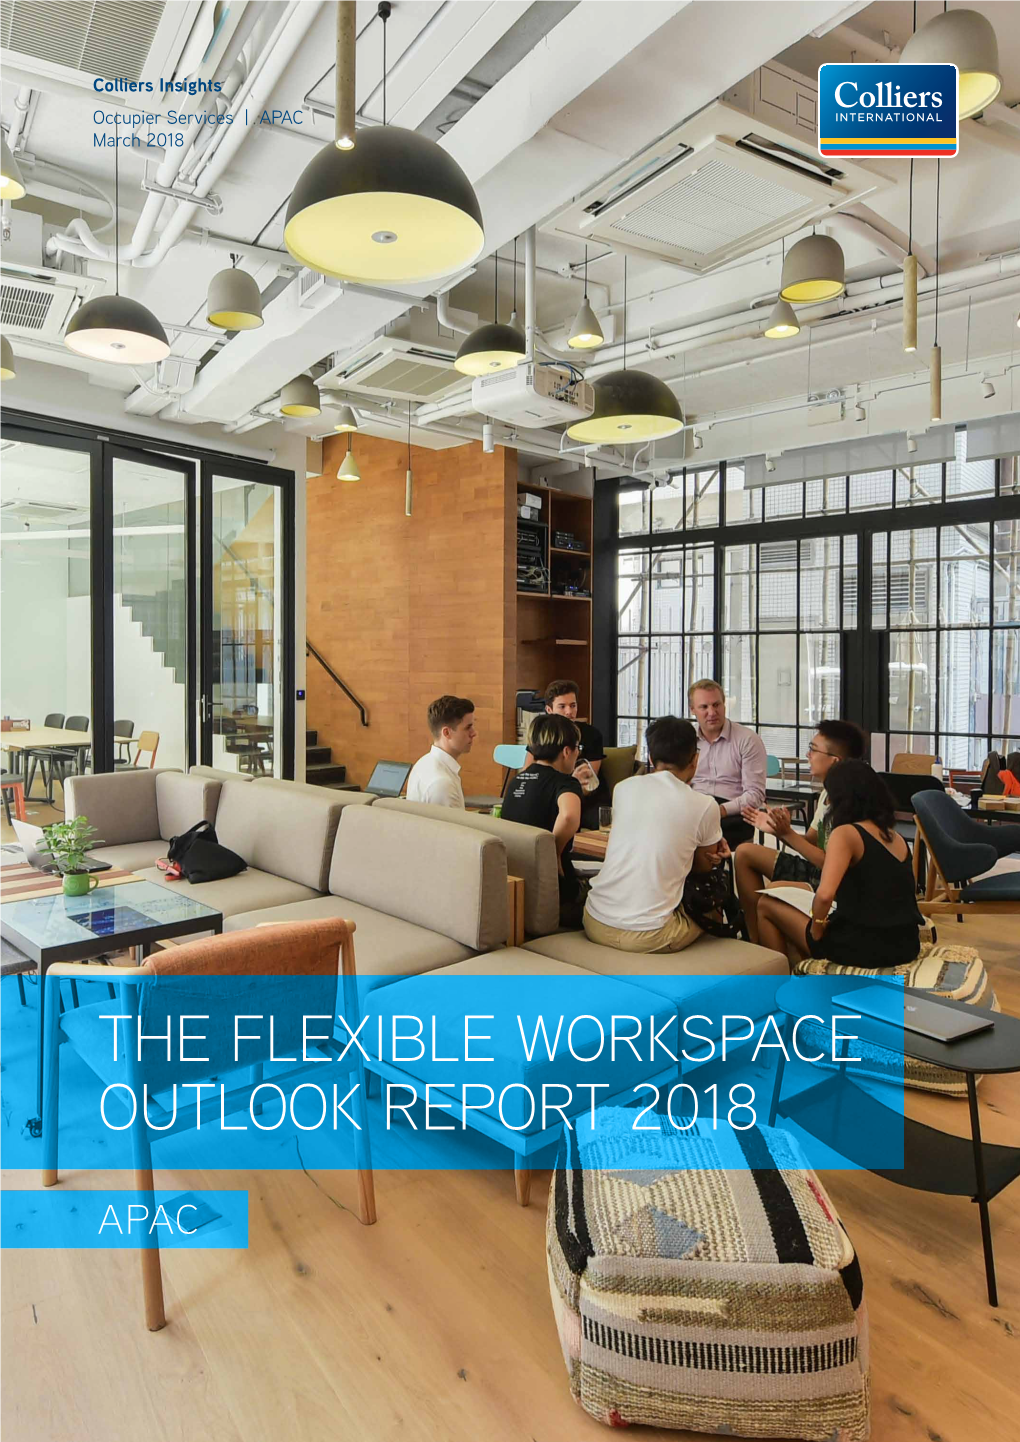 The Flexible Workspace Outlook Report 2018